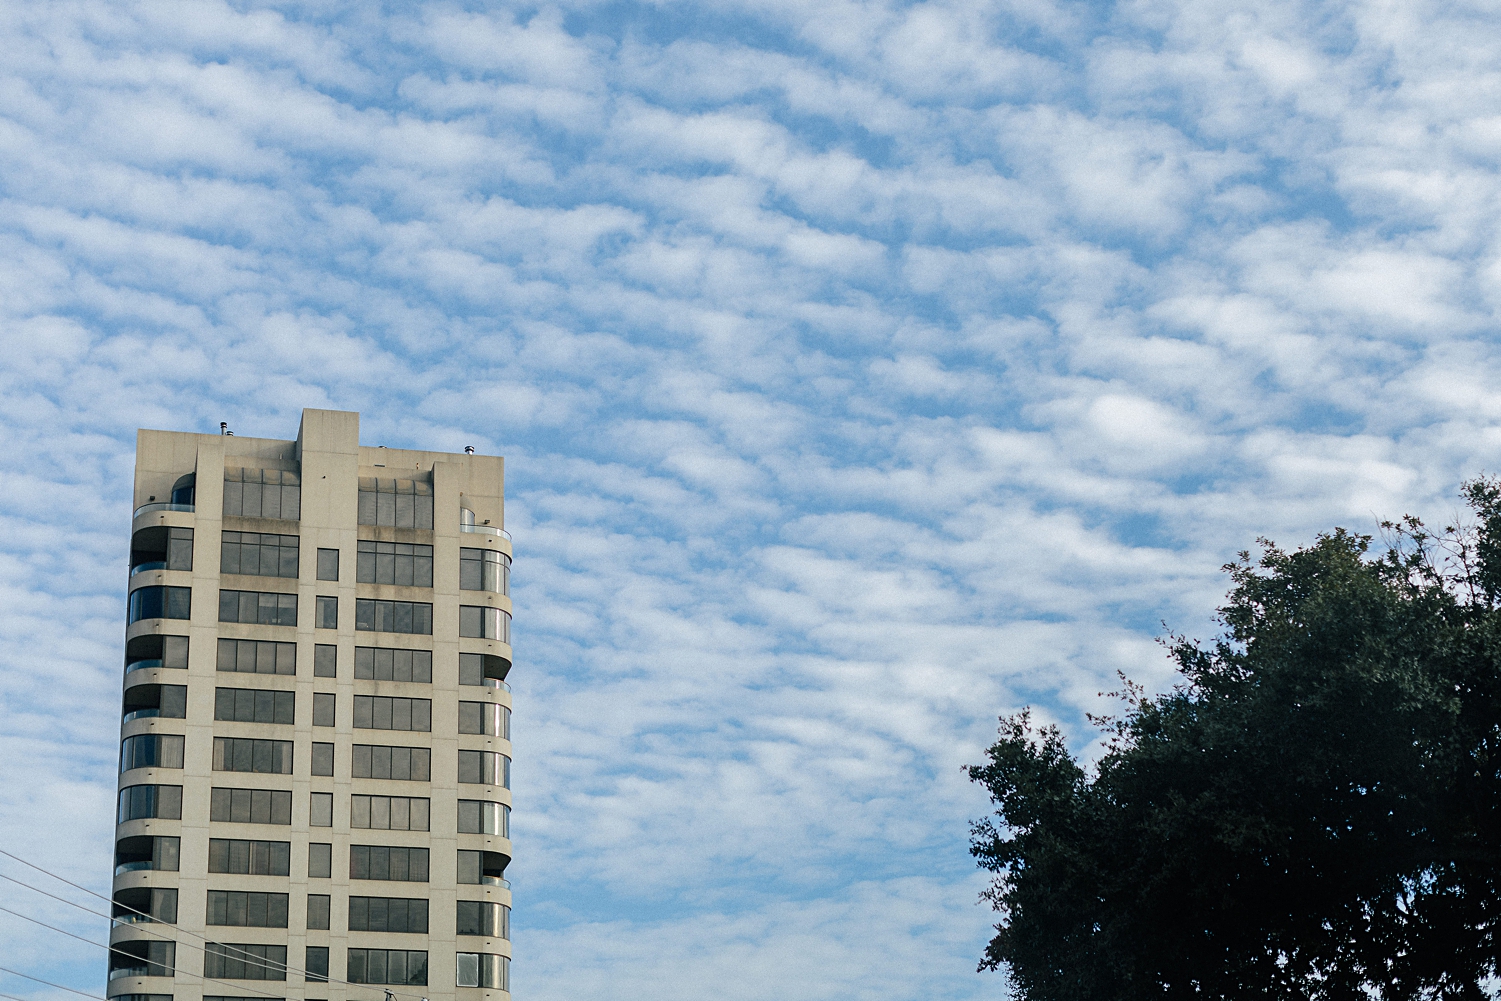 high rise building and tree against blue sky and white clouds